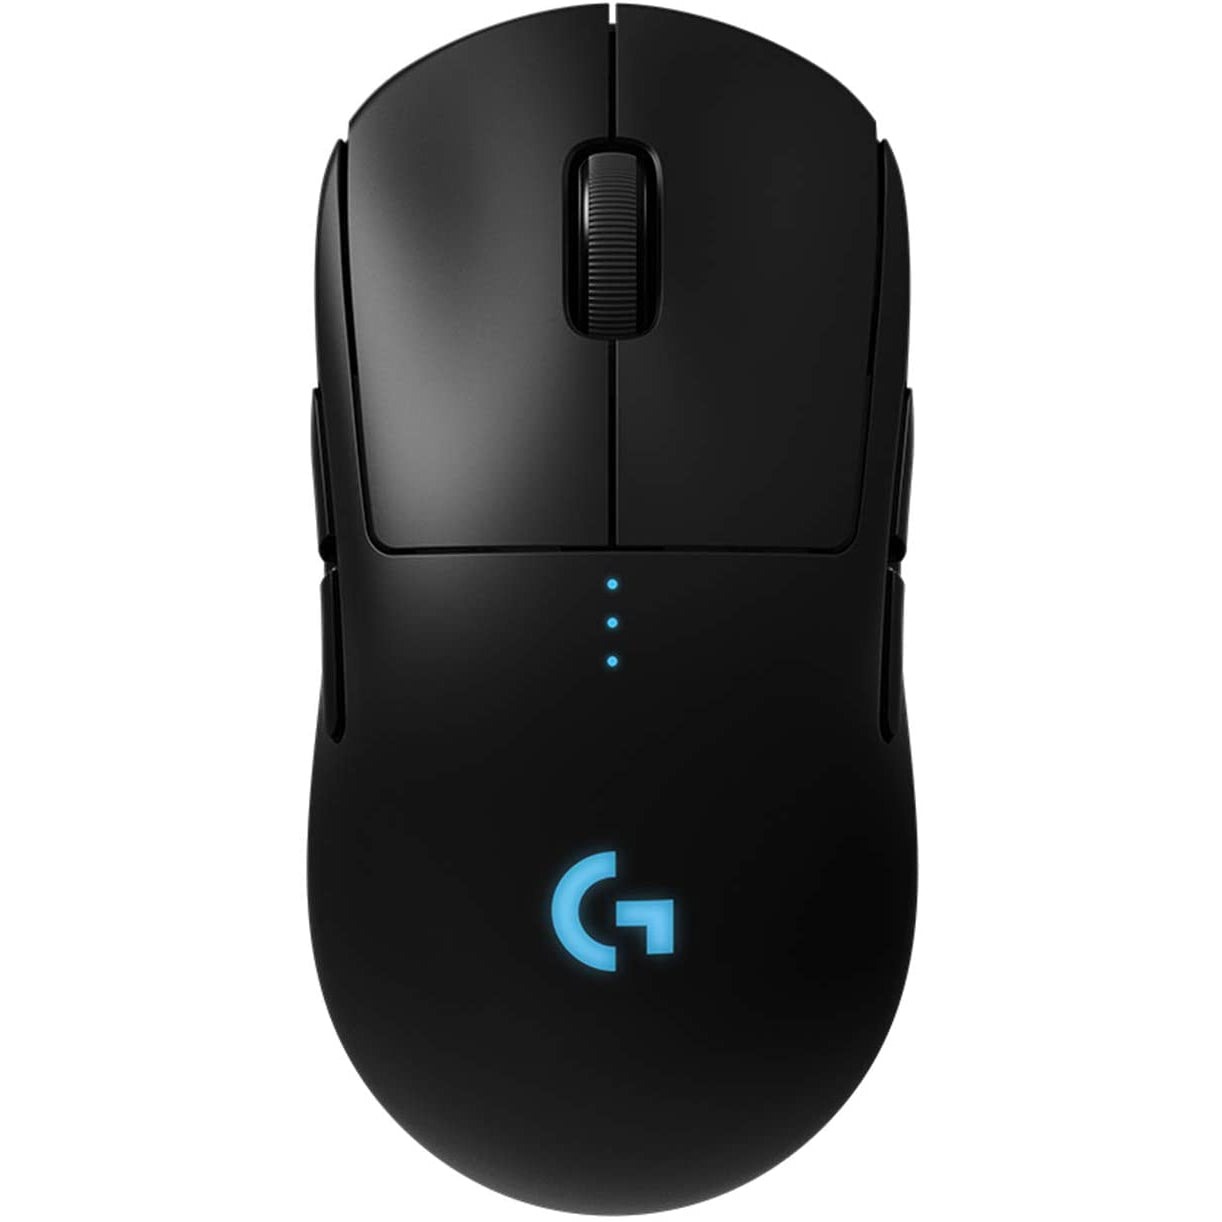 Logitech G PRO Wireless Gaming Mouse - Refurbished Excellent